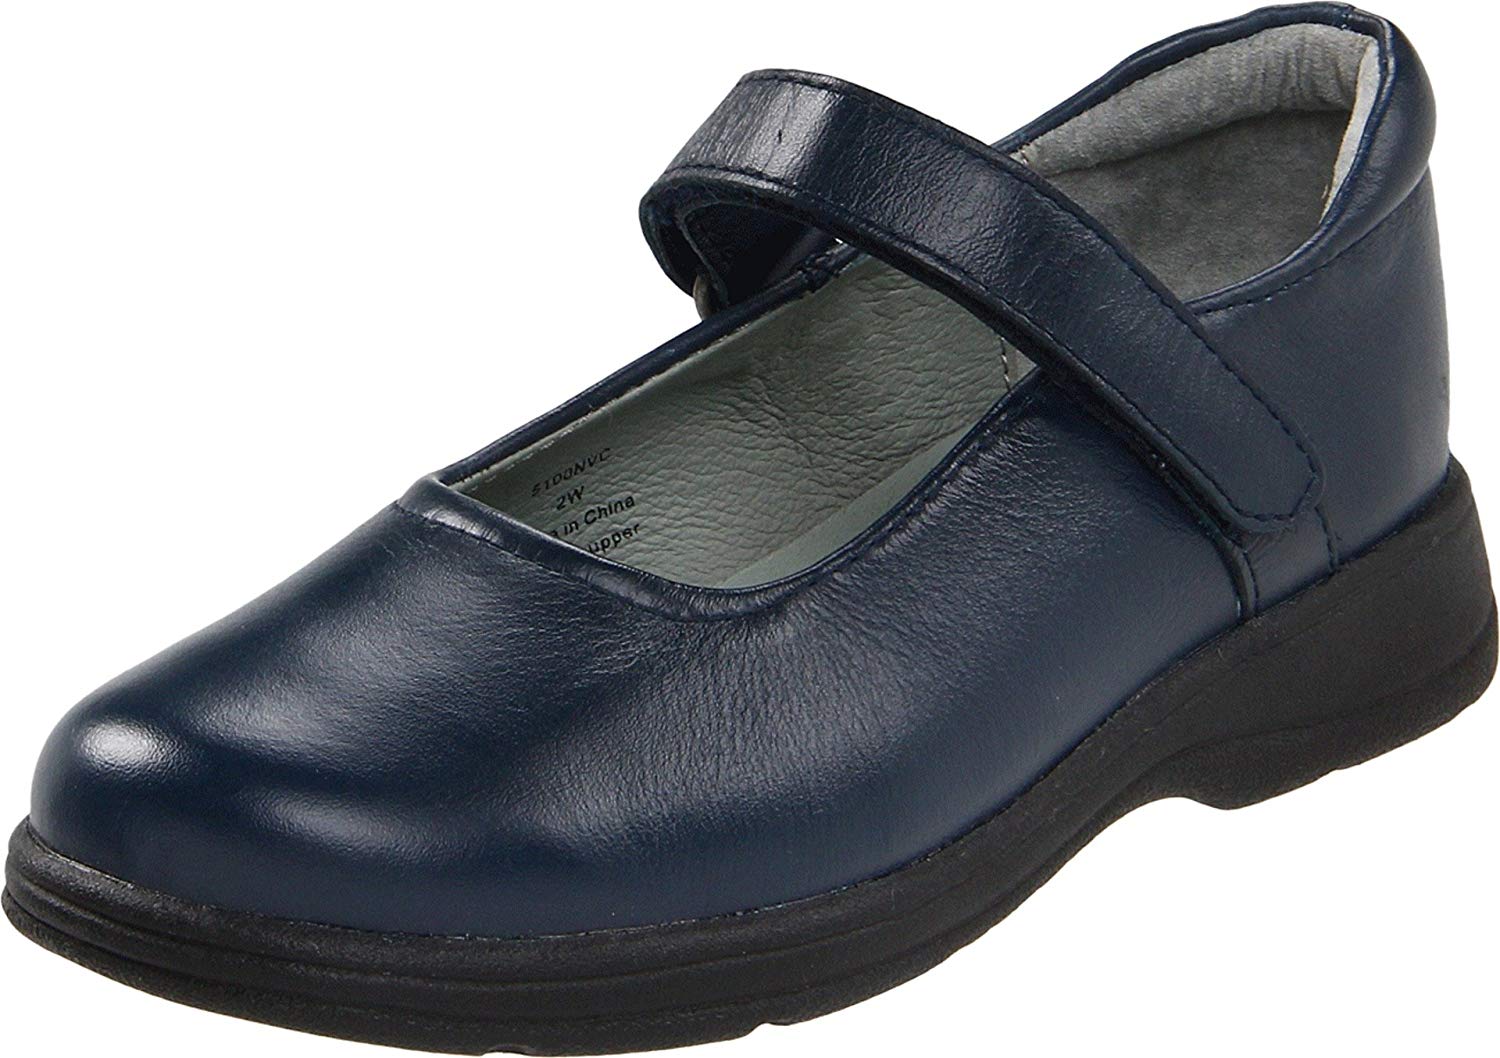 School Issue Children Shoes 5100 Mary jane Leather, Navy (1), Size 5.0 ...